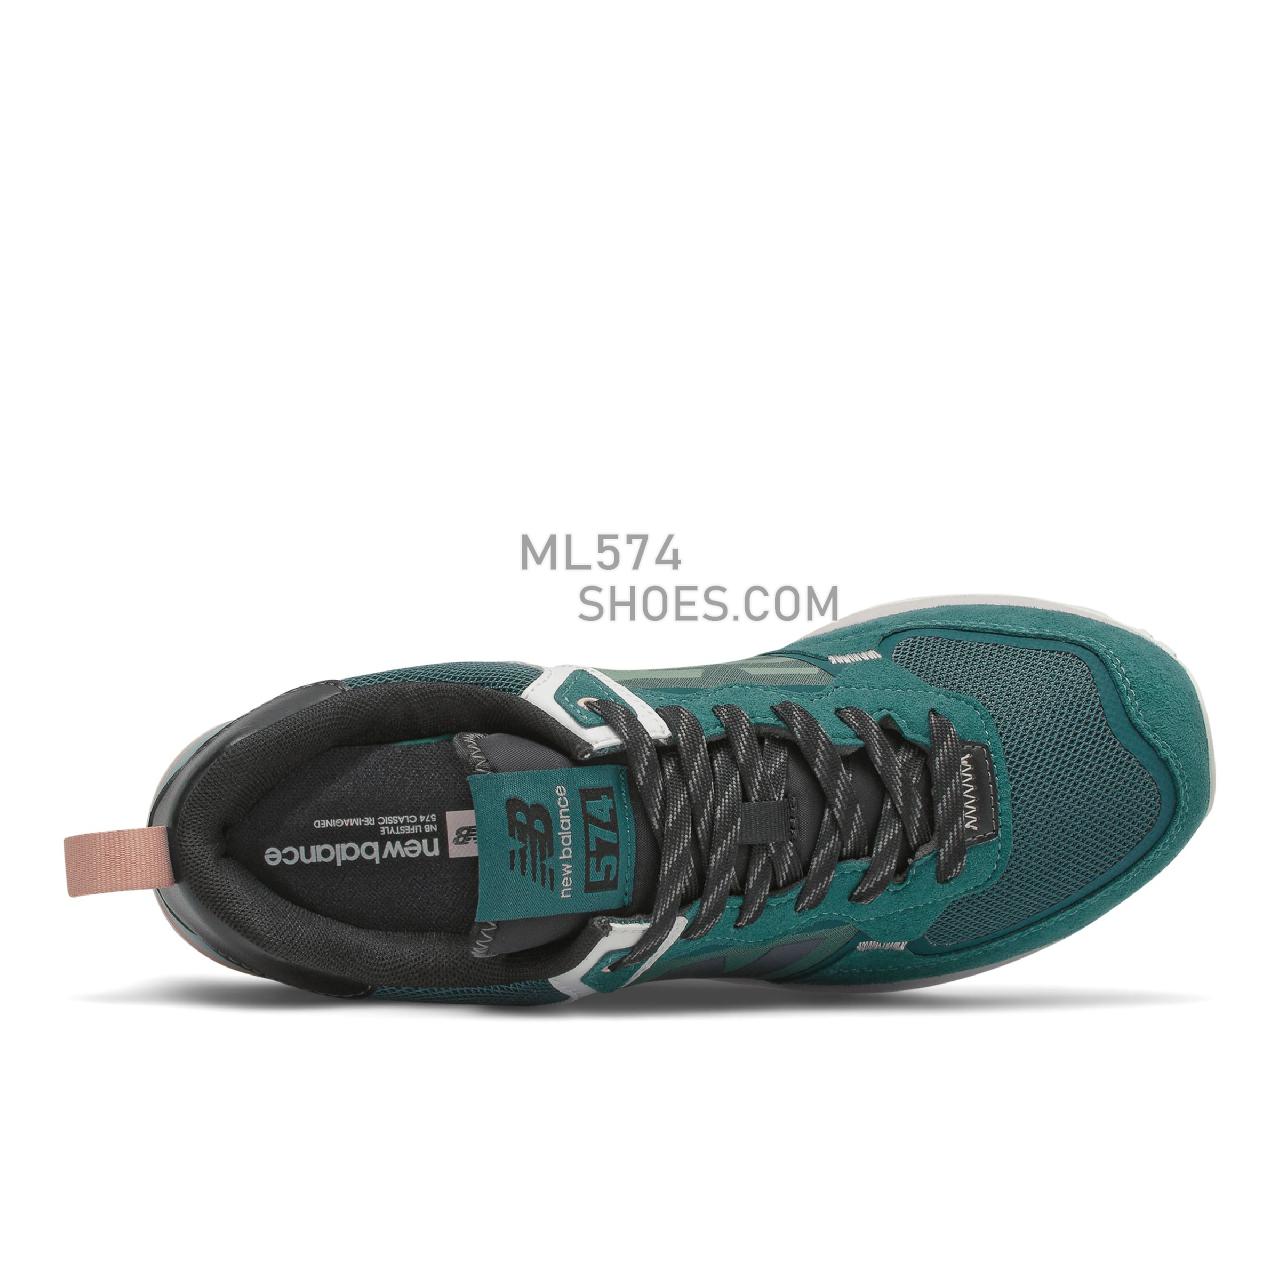 New Balance 574 - Men's Classic Sneakers - Mountain Teal with Oyster Pink - ML574IE2